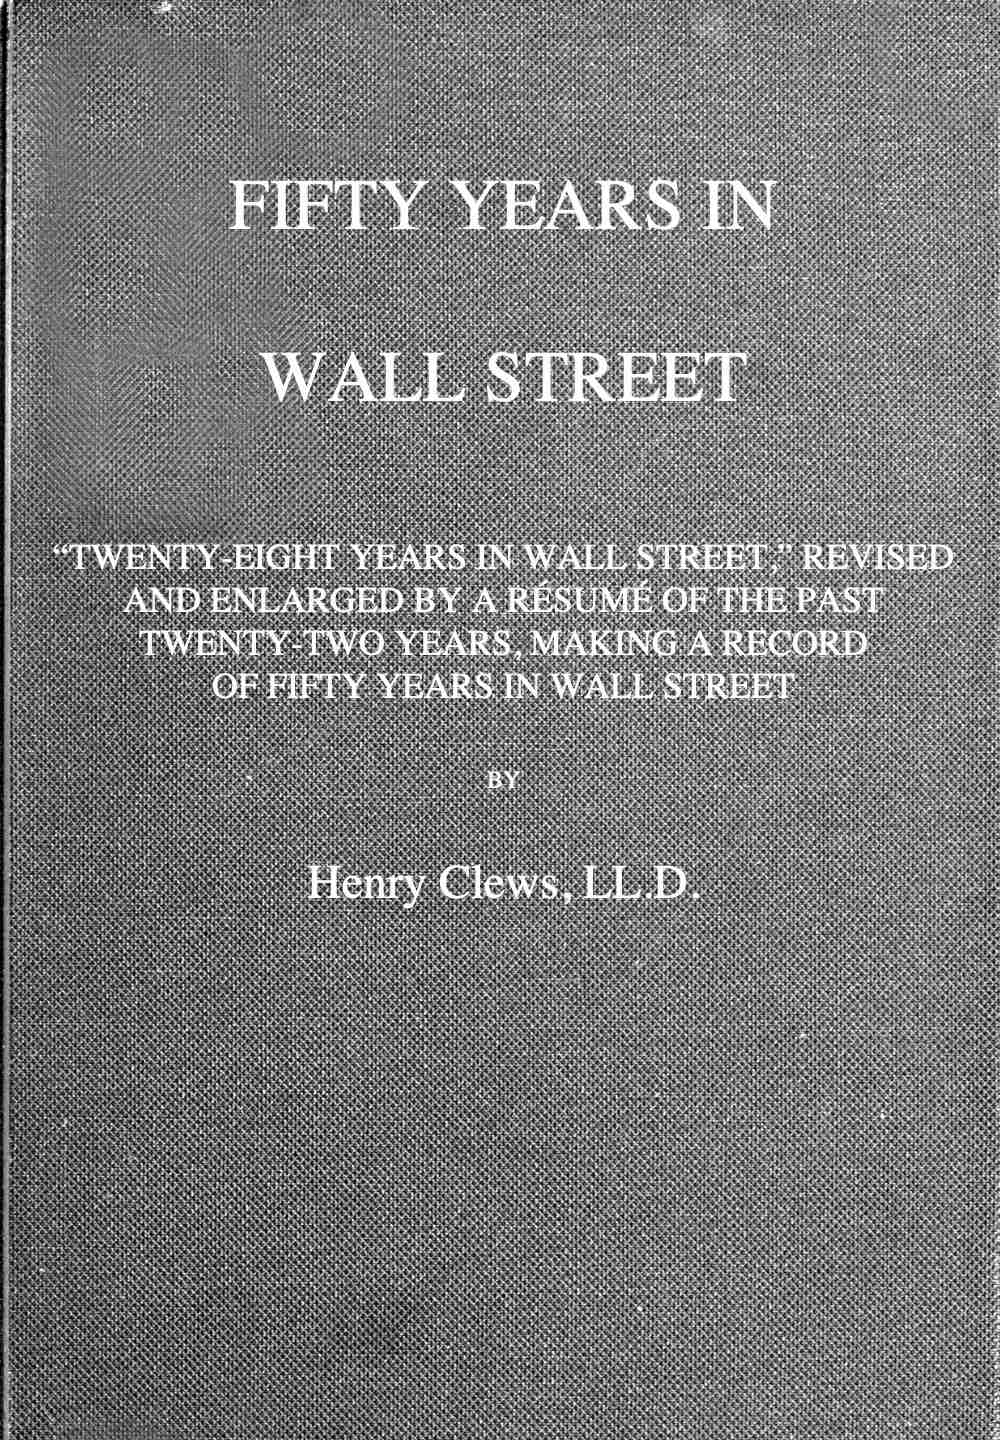 Fifty years in Wall Street